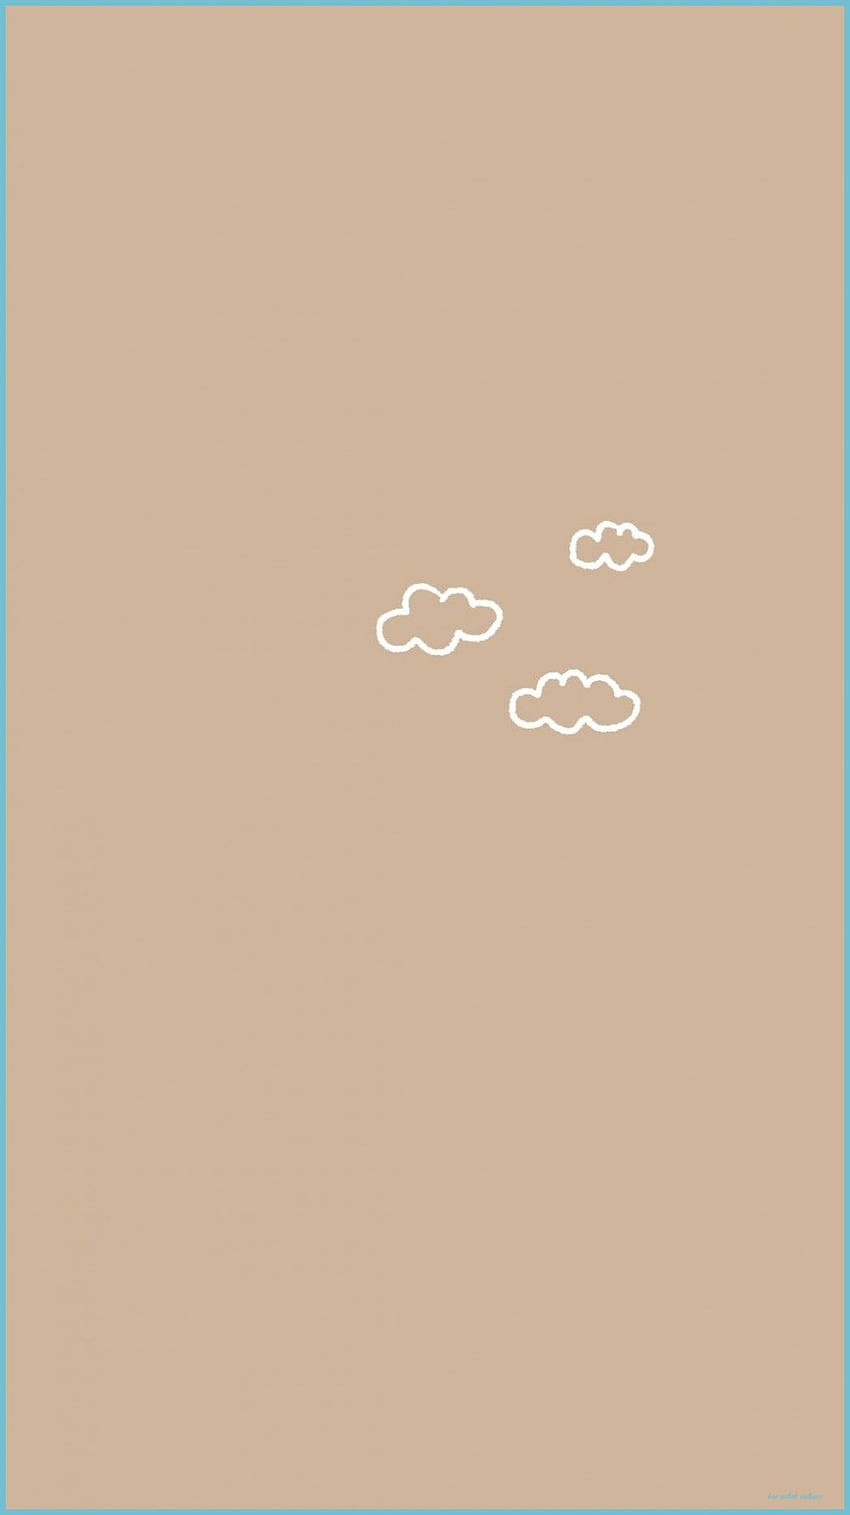 A picture of the sky with clouds and birds - Minimalist beige